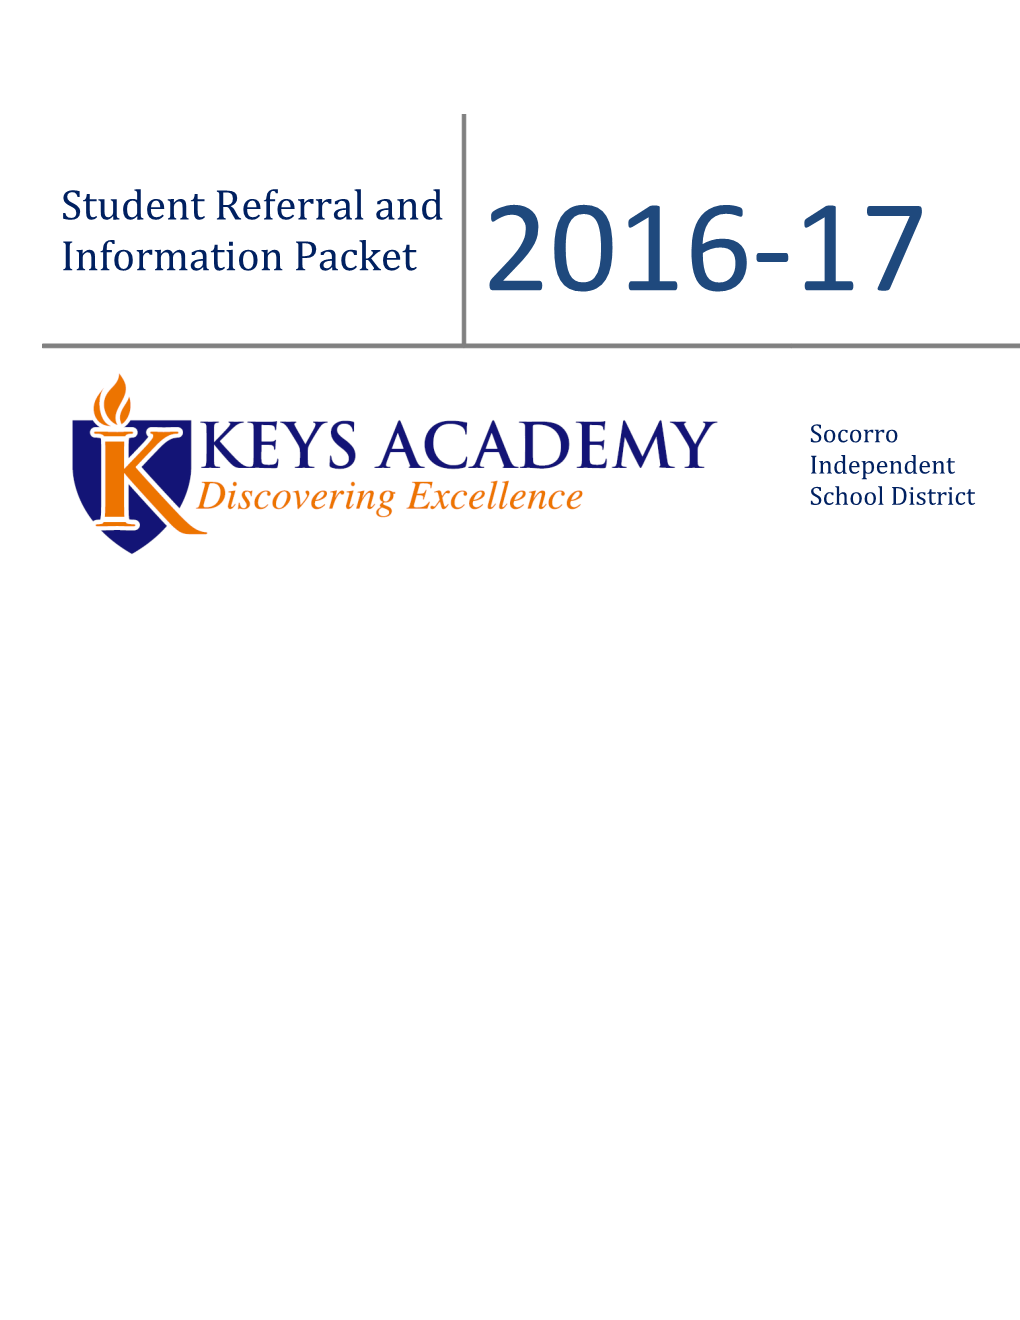 Student Referral and Information Packet